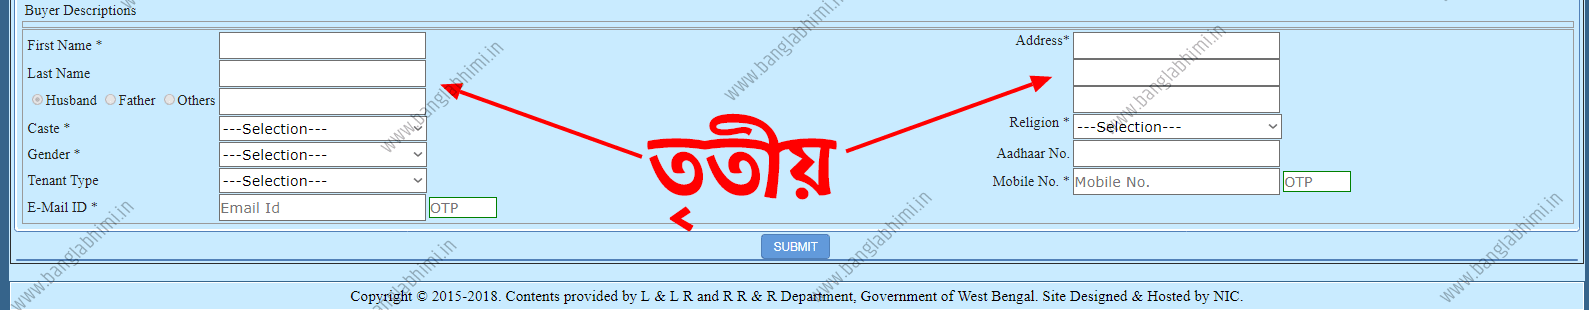 West Bengal Land & Plot Information With Mouja Map